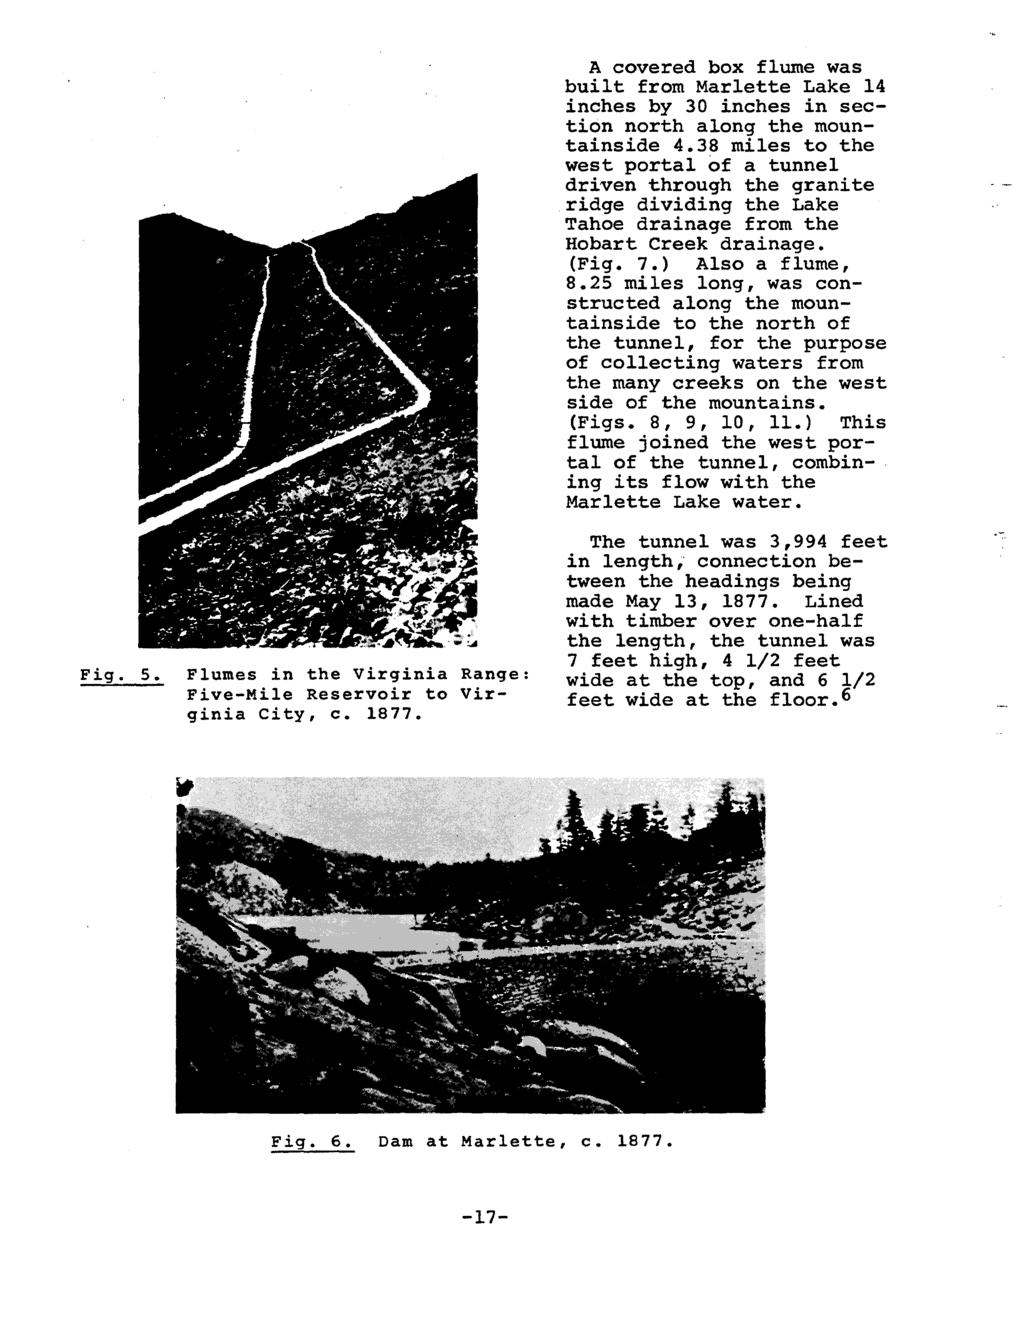 Fig. 5. Flumes in the Virginia Range: Five-Mile Reservoir to Virginia City, c. 1877. A covered box flume was built from Marlette Lake 14 inches by 30 inches in section north along the mountainside 4.